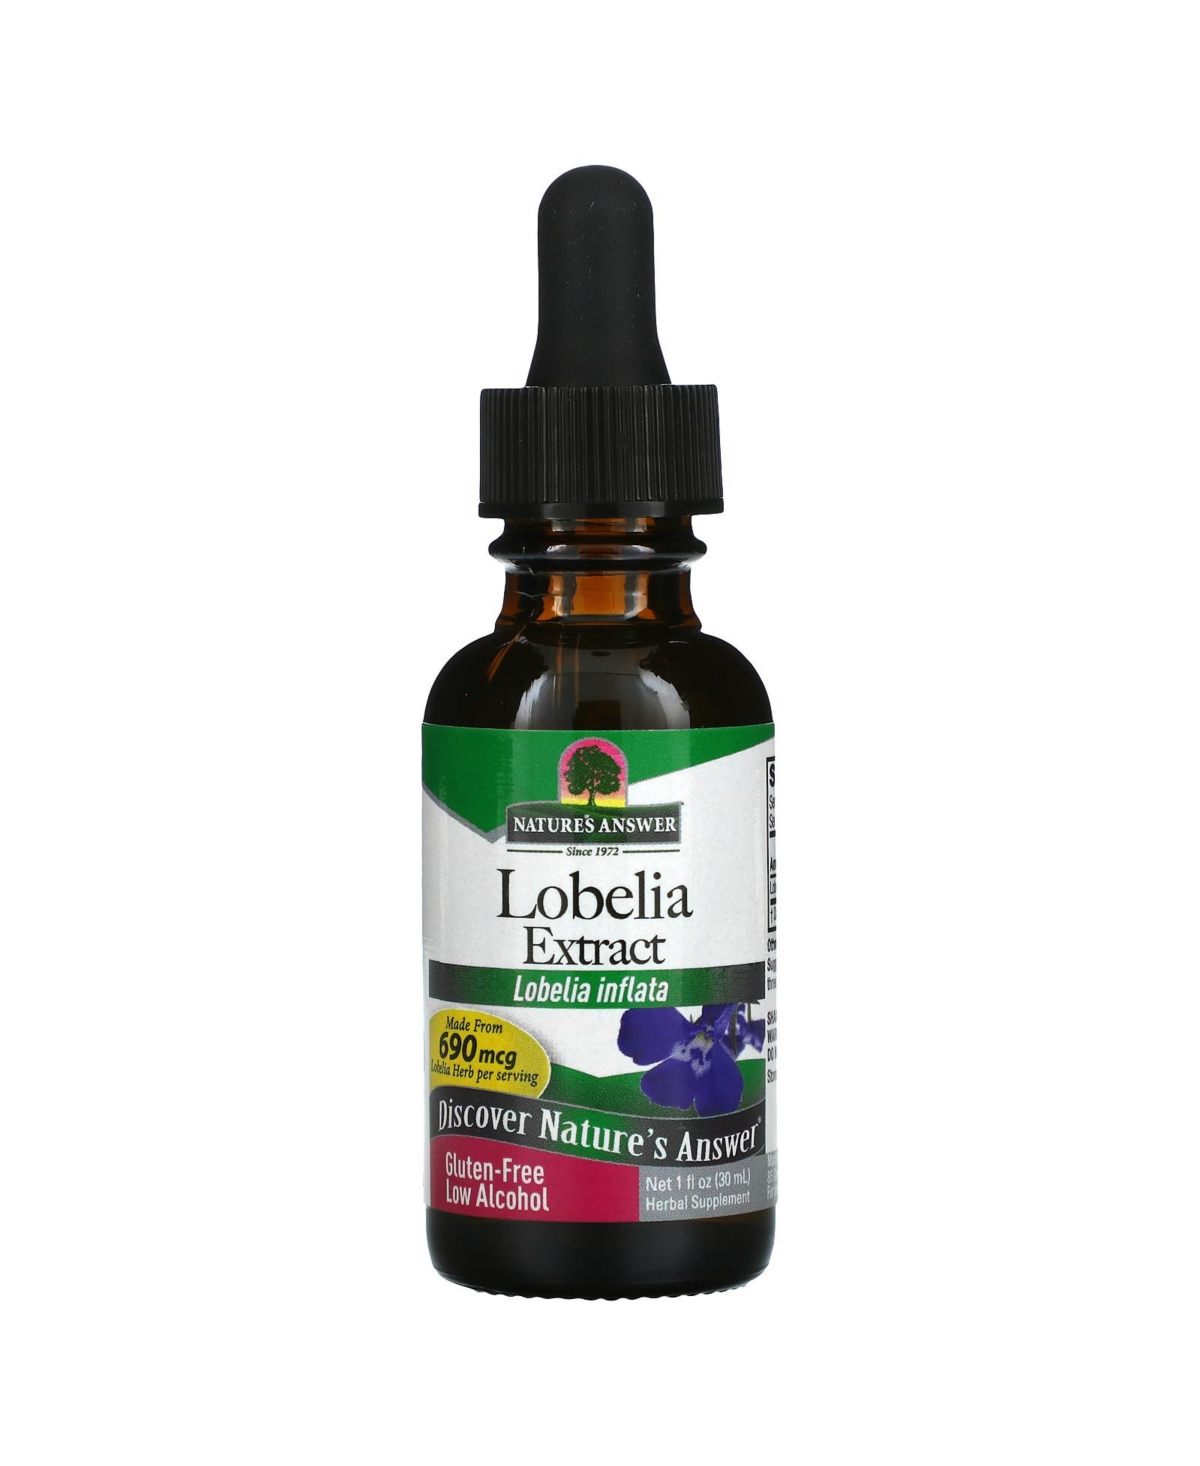 Lobelia Extract Low Alcohol 690 mg - 1 fl oz (30 ml) - Assorted Pre-pack (See Table